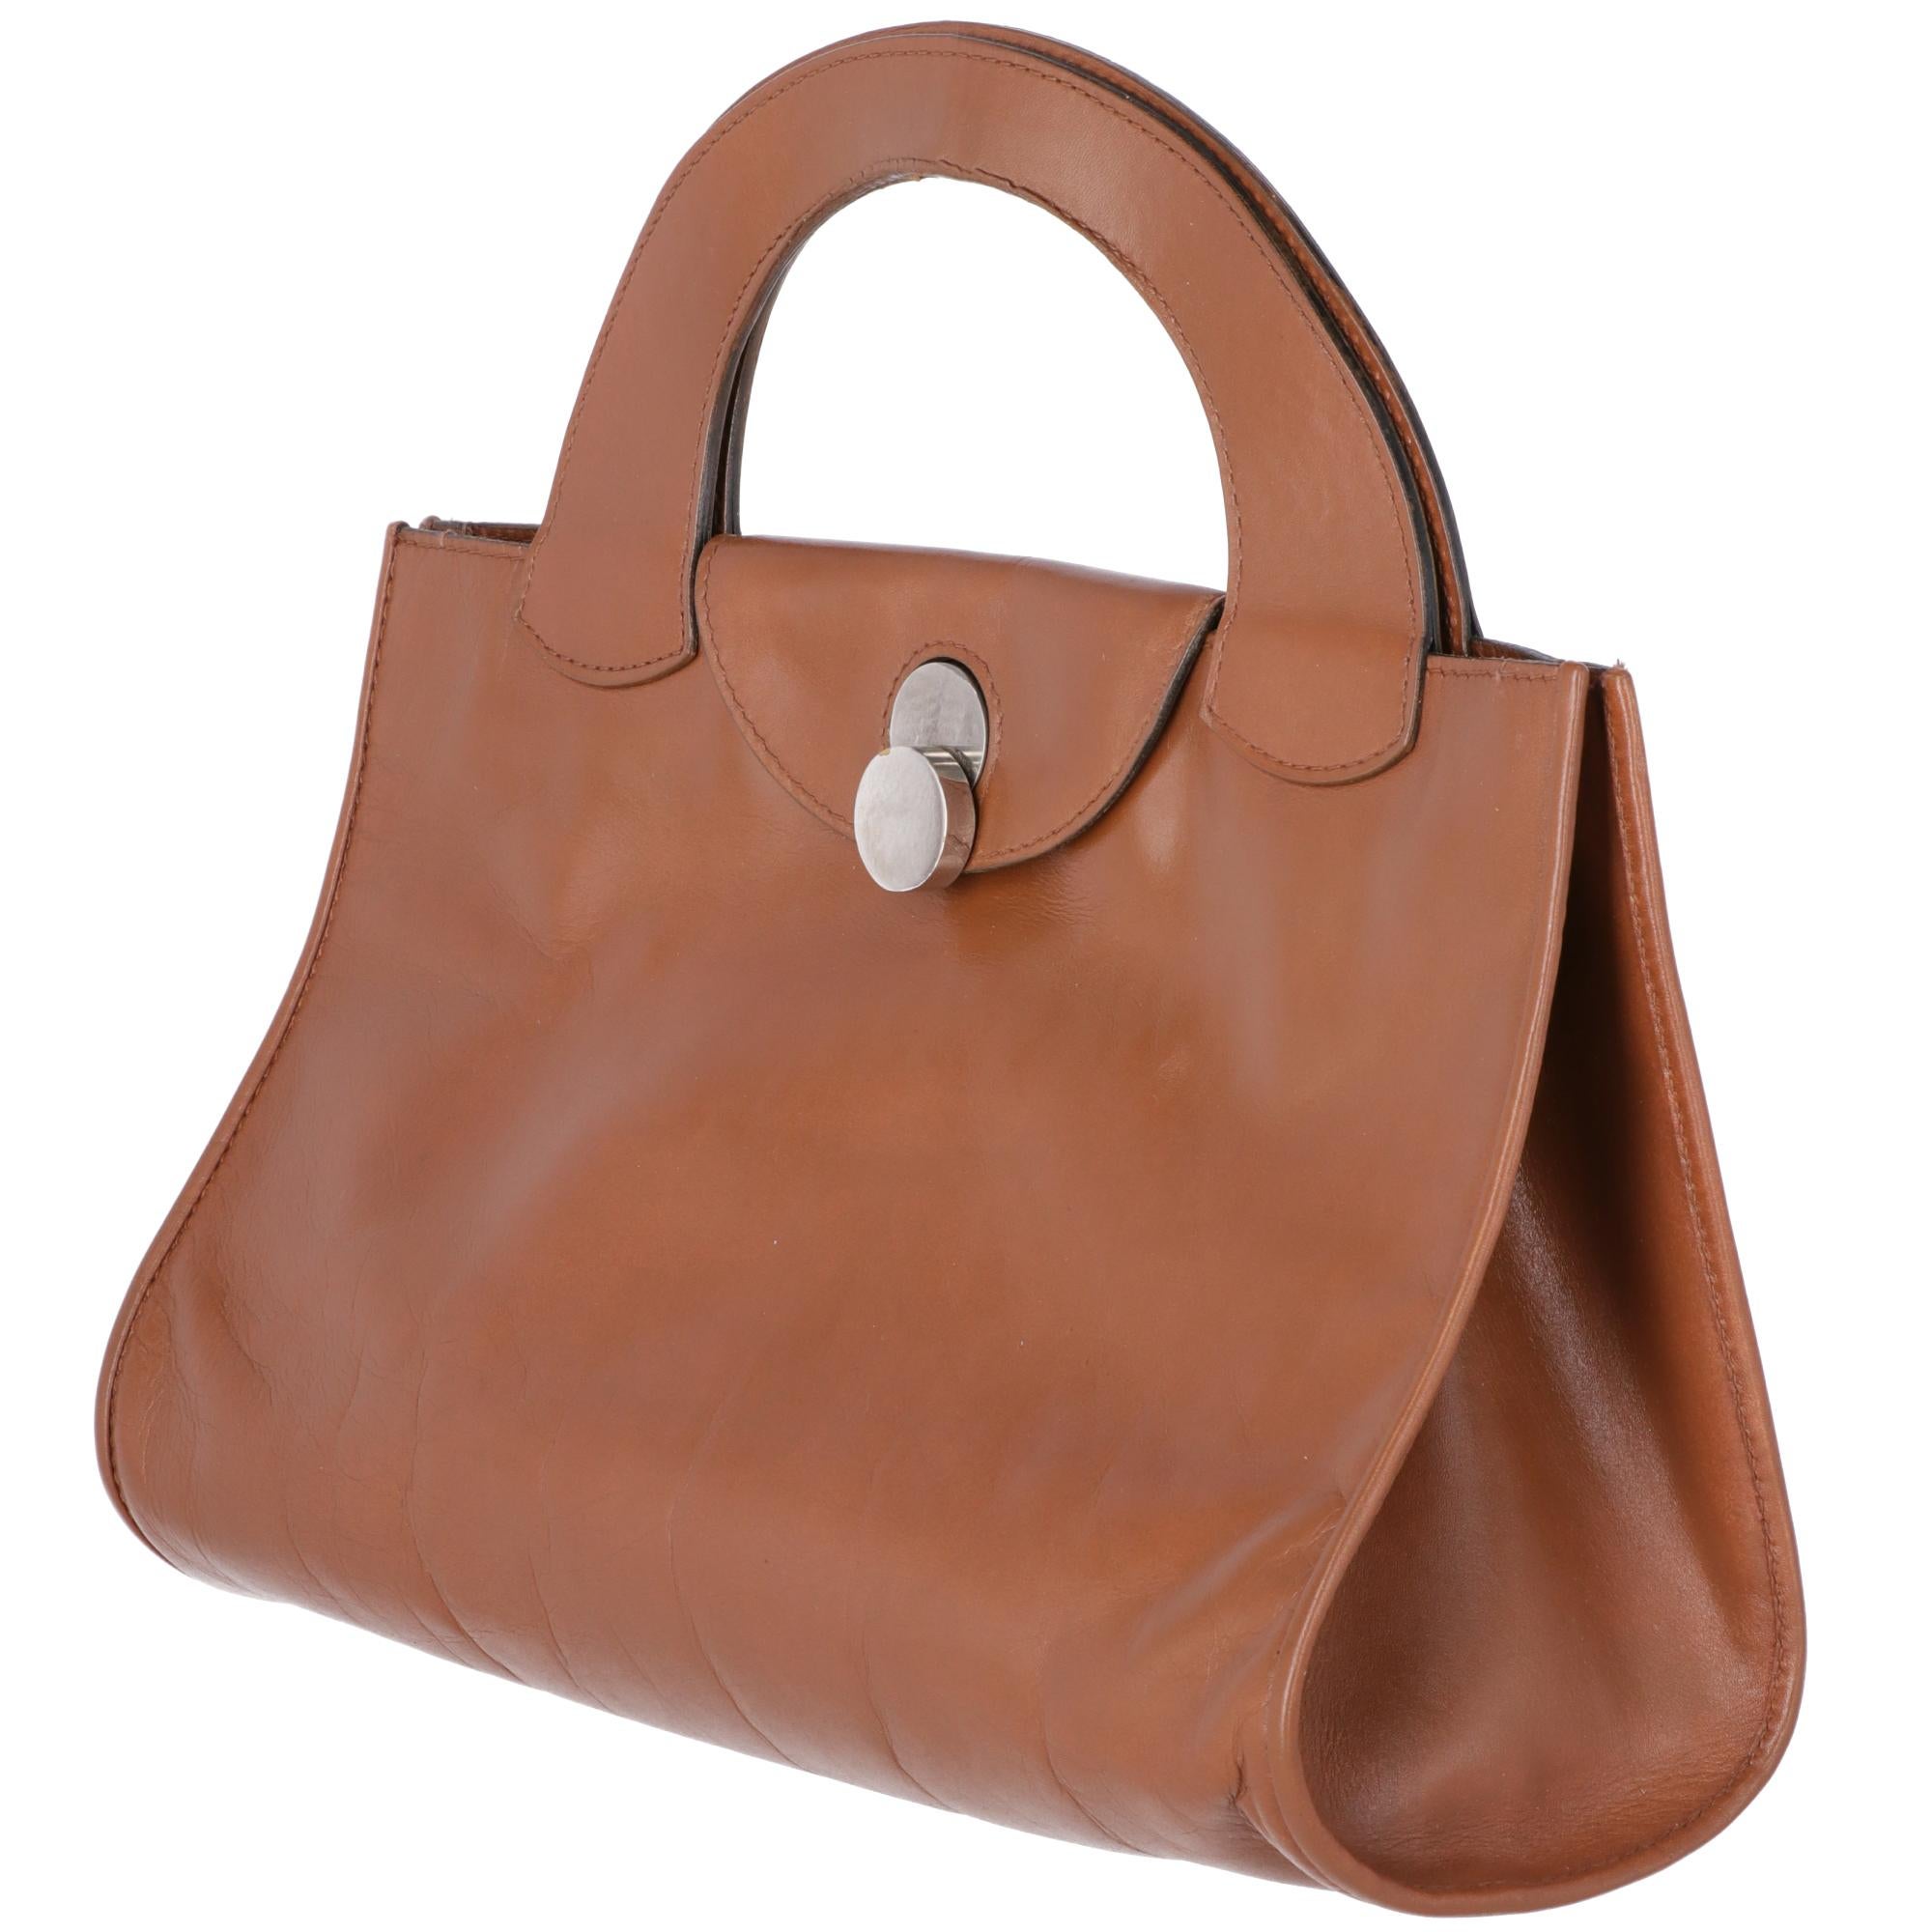 Gherardini brown leather handbag. Featuring a turn lock closure and two internal patch pockets, one welt and one zipped. Leather lined.

Height: 23 cm
Width: 38 cm
Depth: 15 cm
Handle height: 11 cm

Product code: X5127

Notes: The bag shows slightly